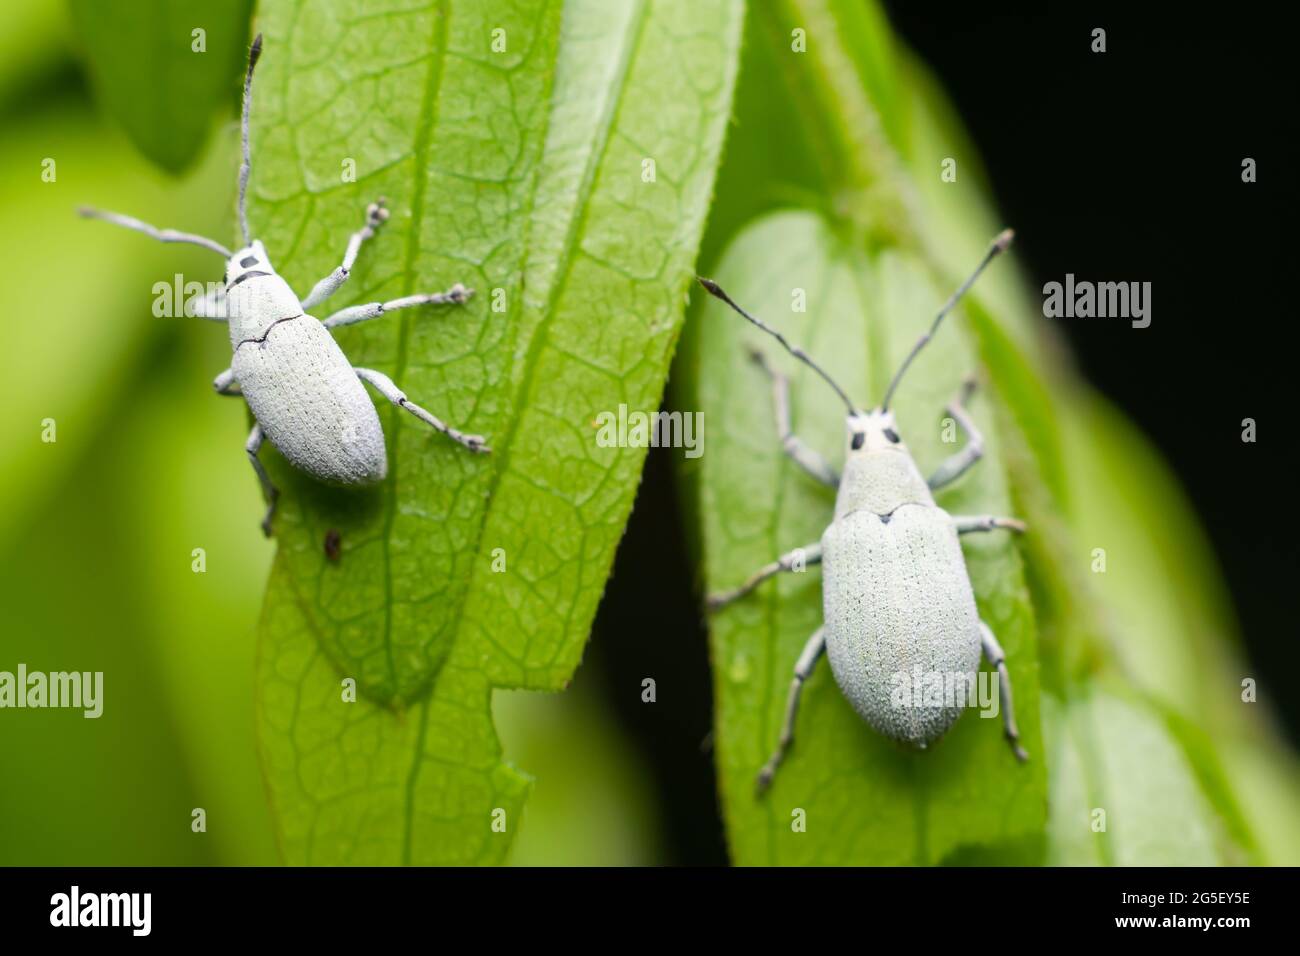 Two white pine weevils on the plant leaves. Used selective focus. Stock Photo